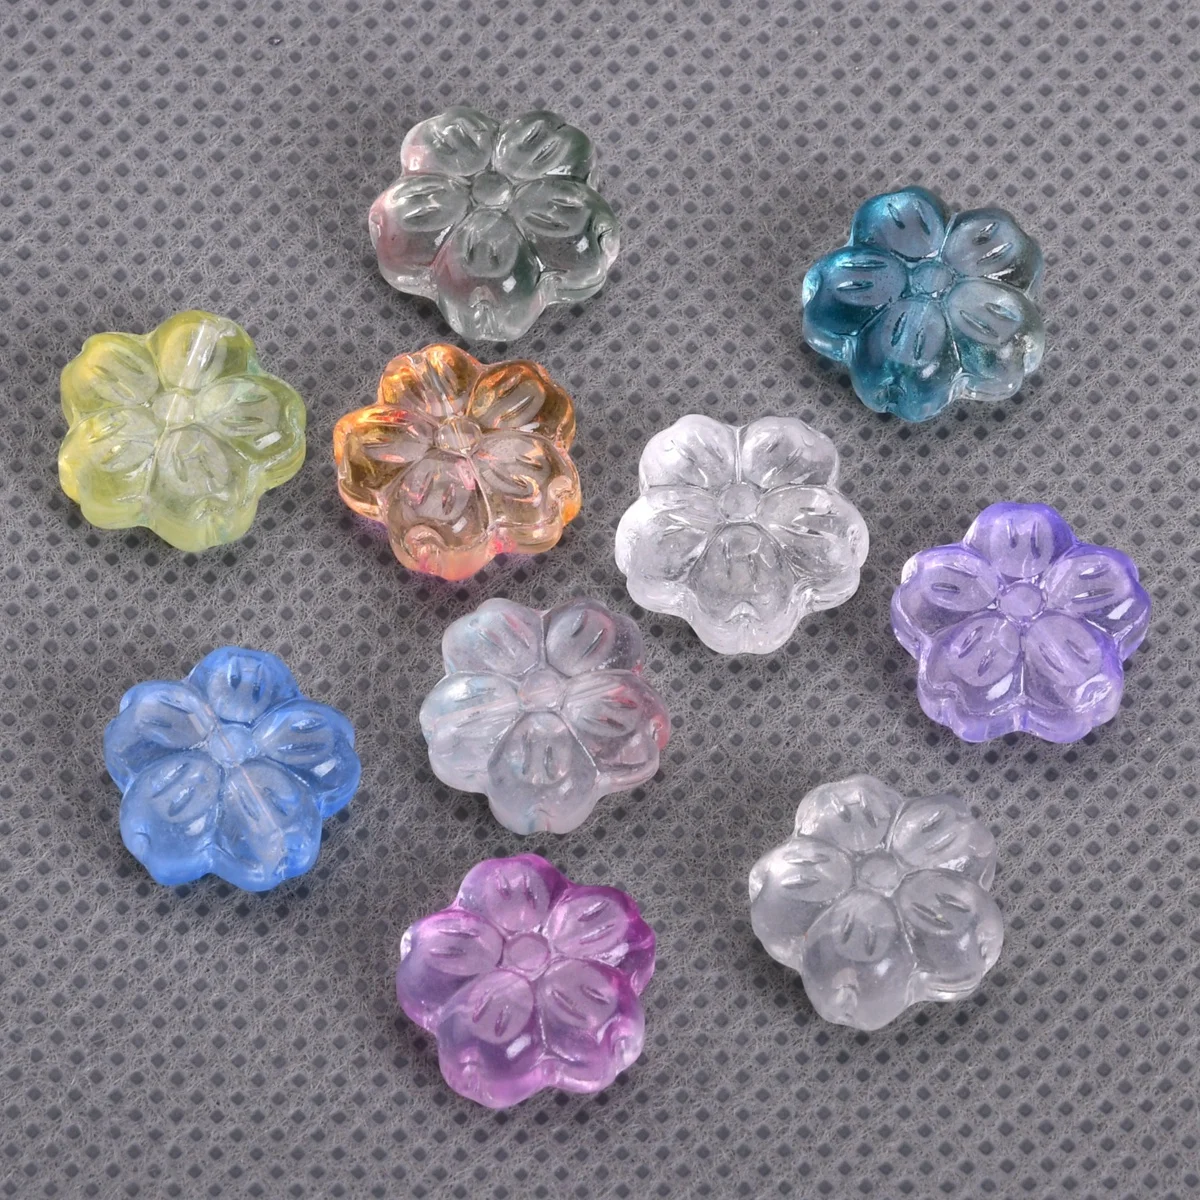 10pcs Mixed 14mm Flower Shape Handmade Lampwork Glass Loose Beads For Jewelry Making DIY Crafts Findings